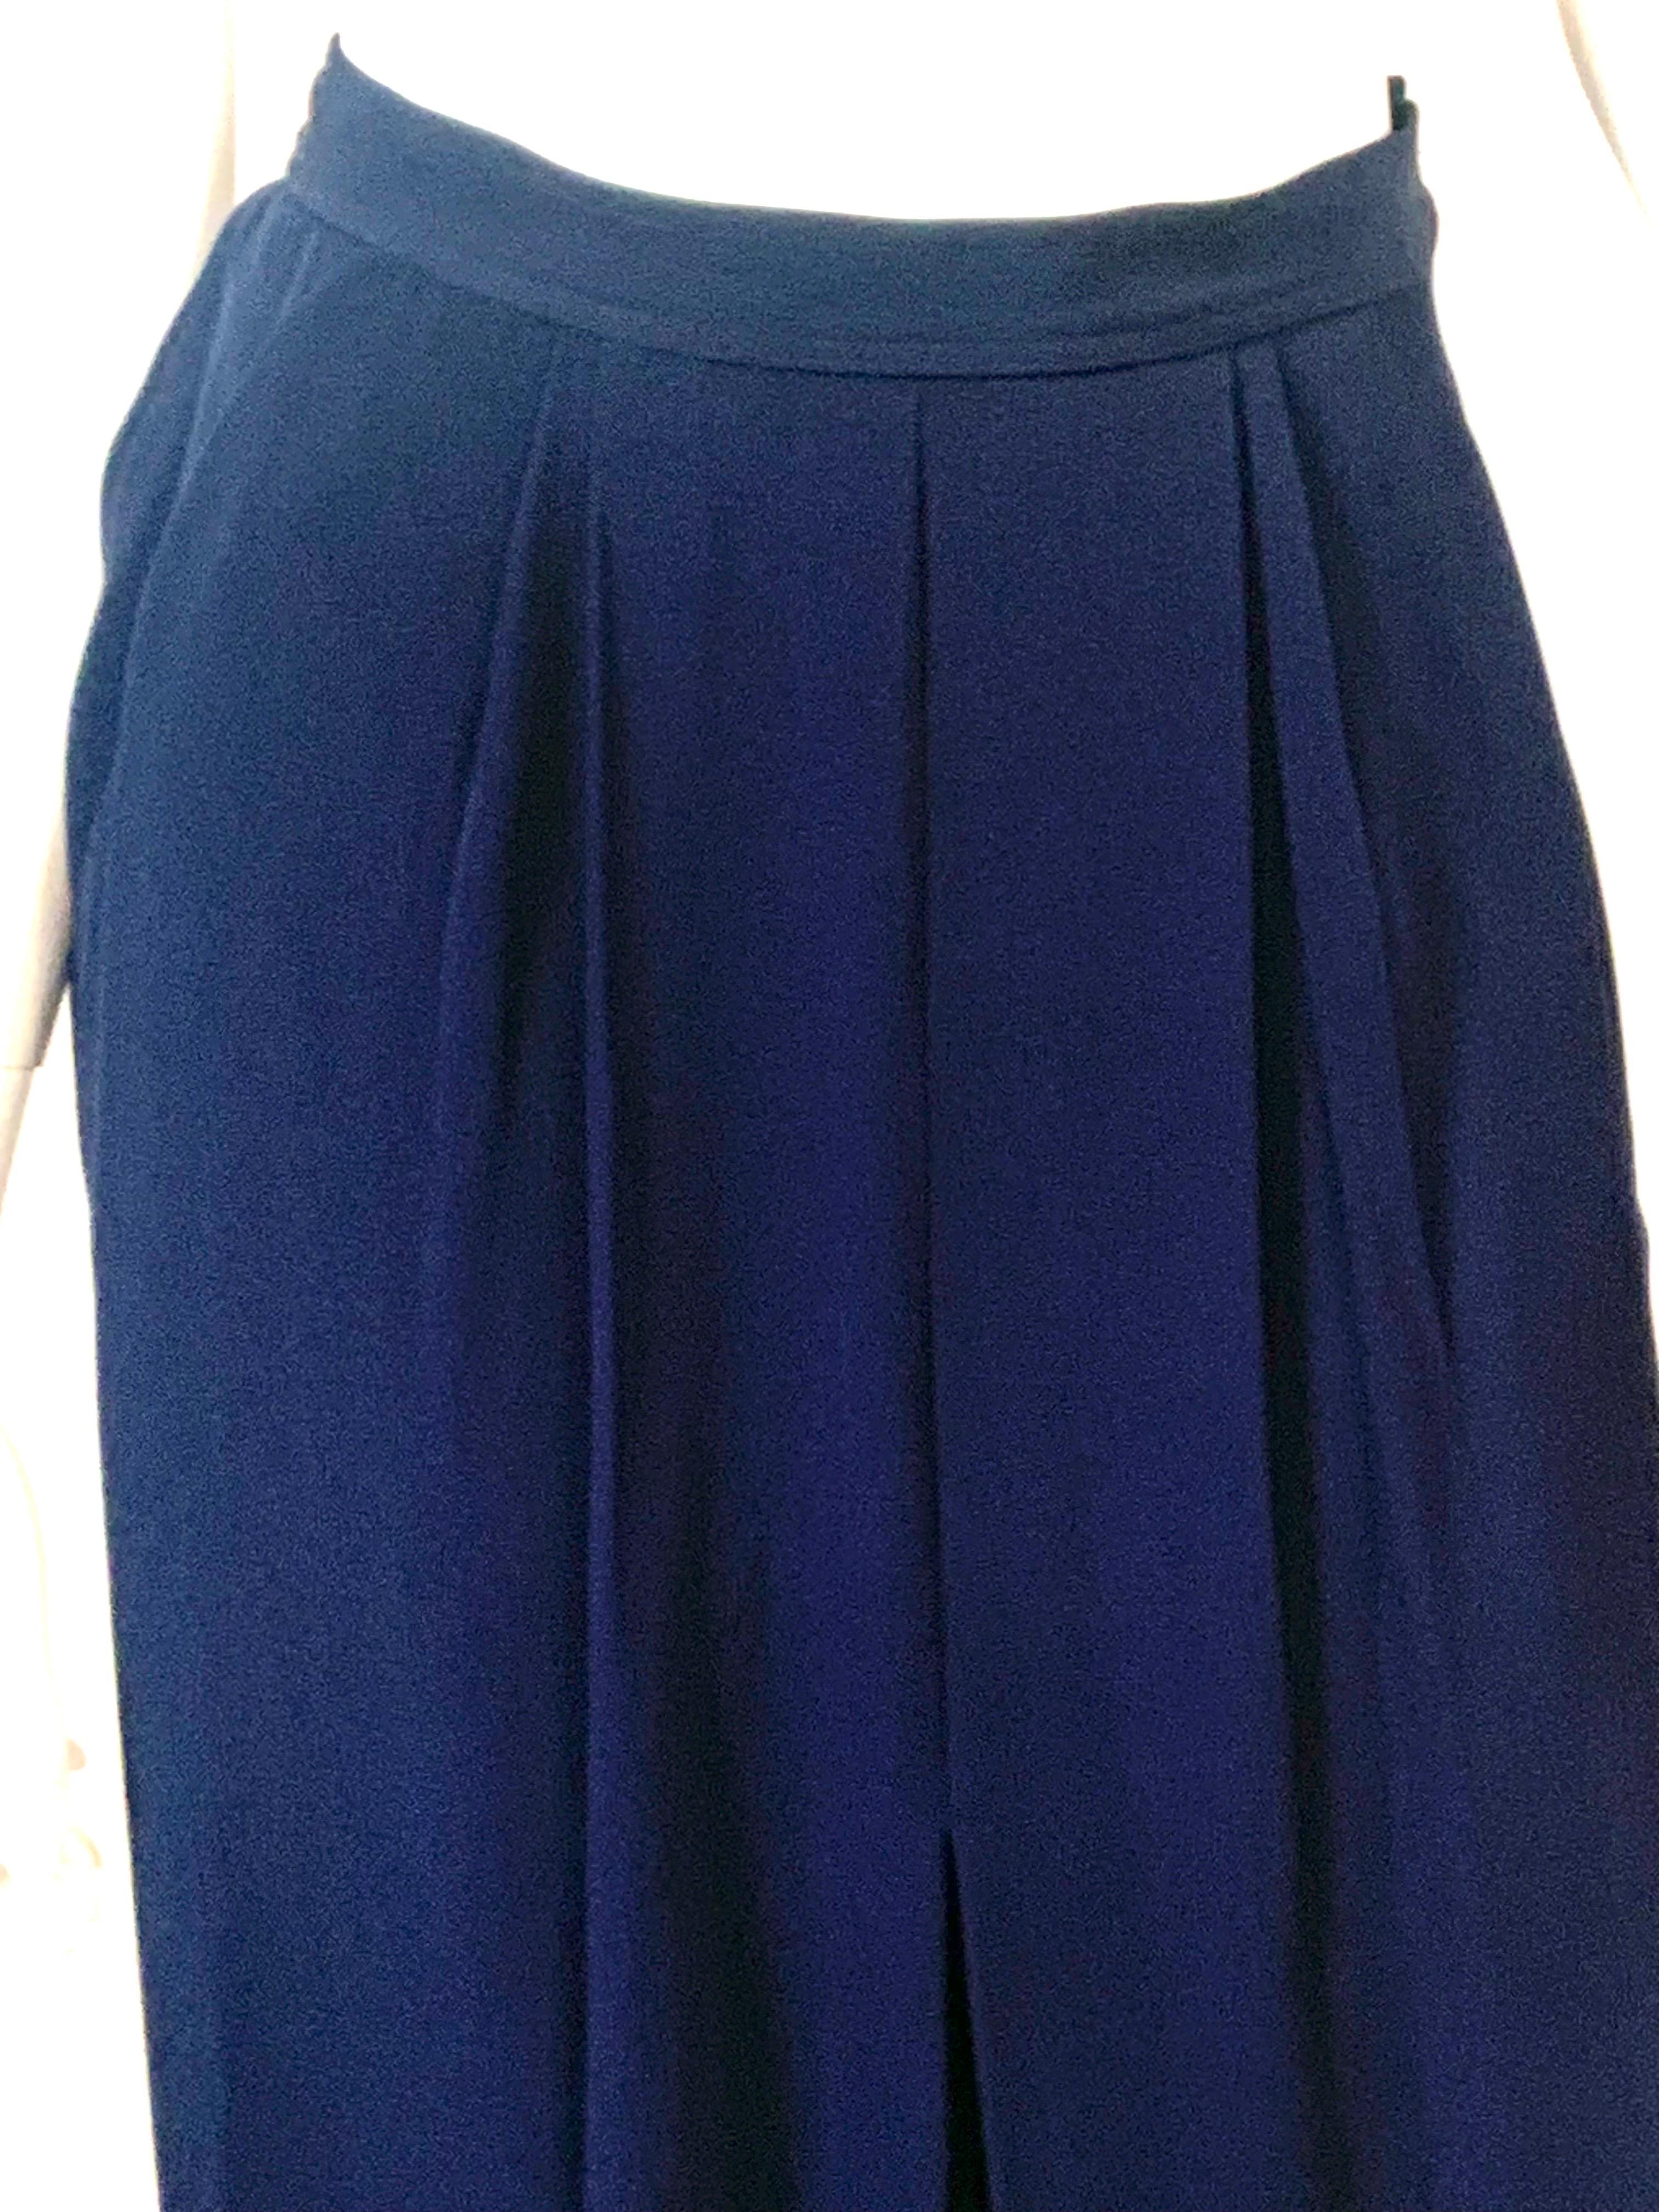 This Yves Saint Laurent Rive Gauche long skirt still retains the original tags, attached to the label. Never worn, it is in pristine condition. There are loose pleats at the center front, pockets in the side seams and soft gathers at the back.  This